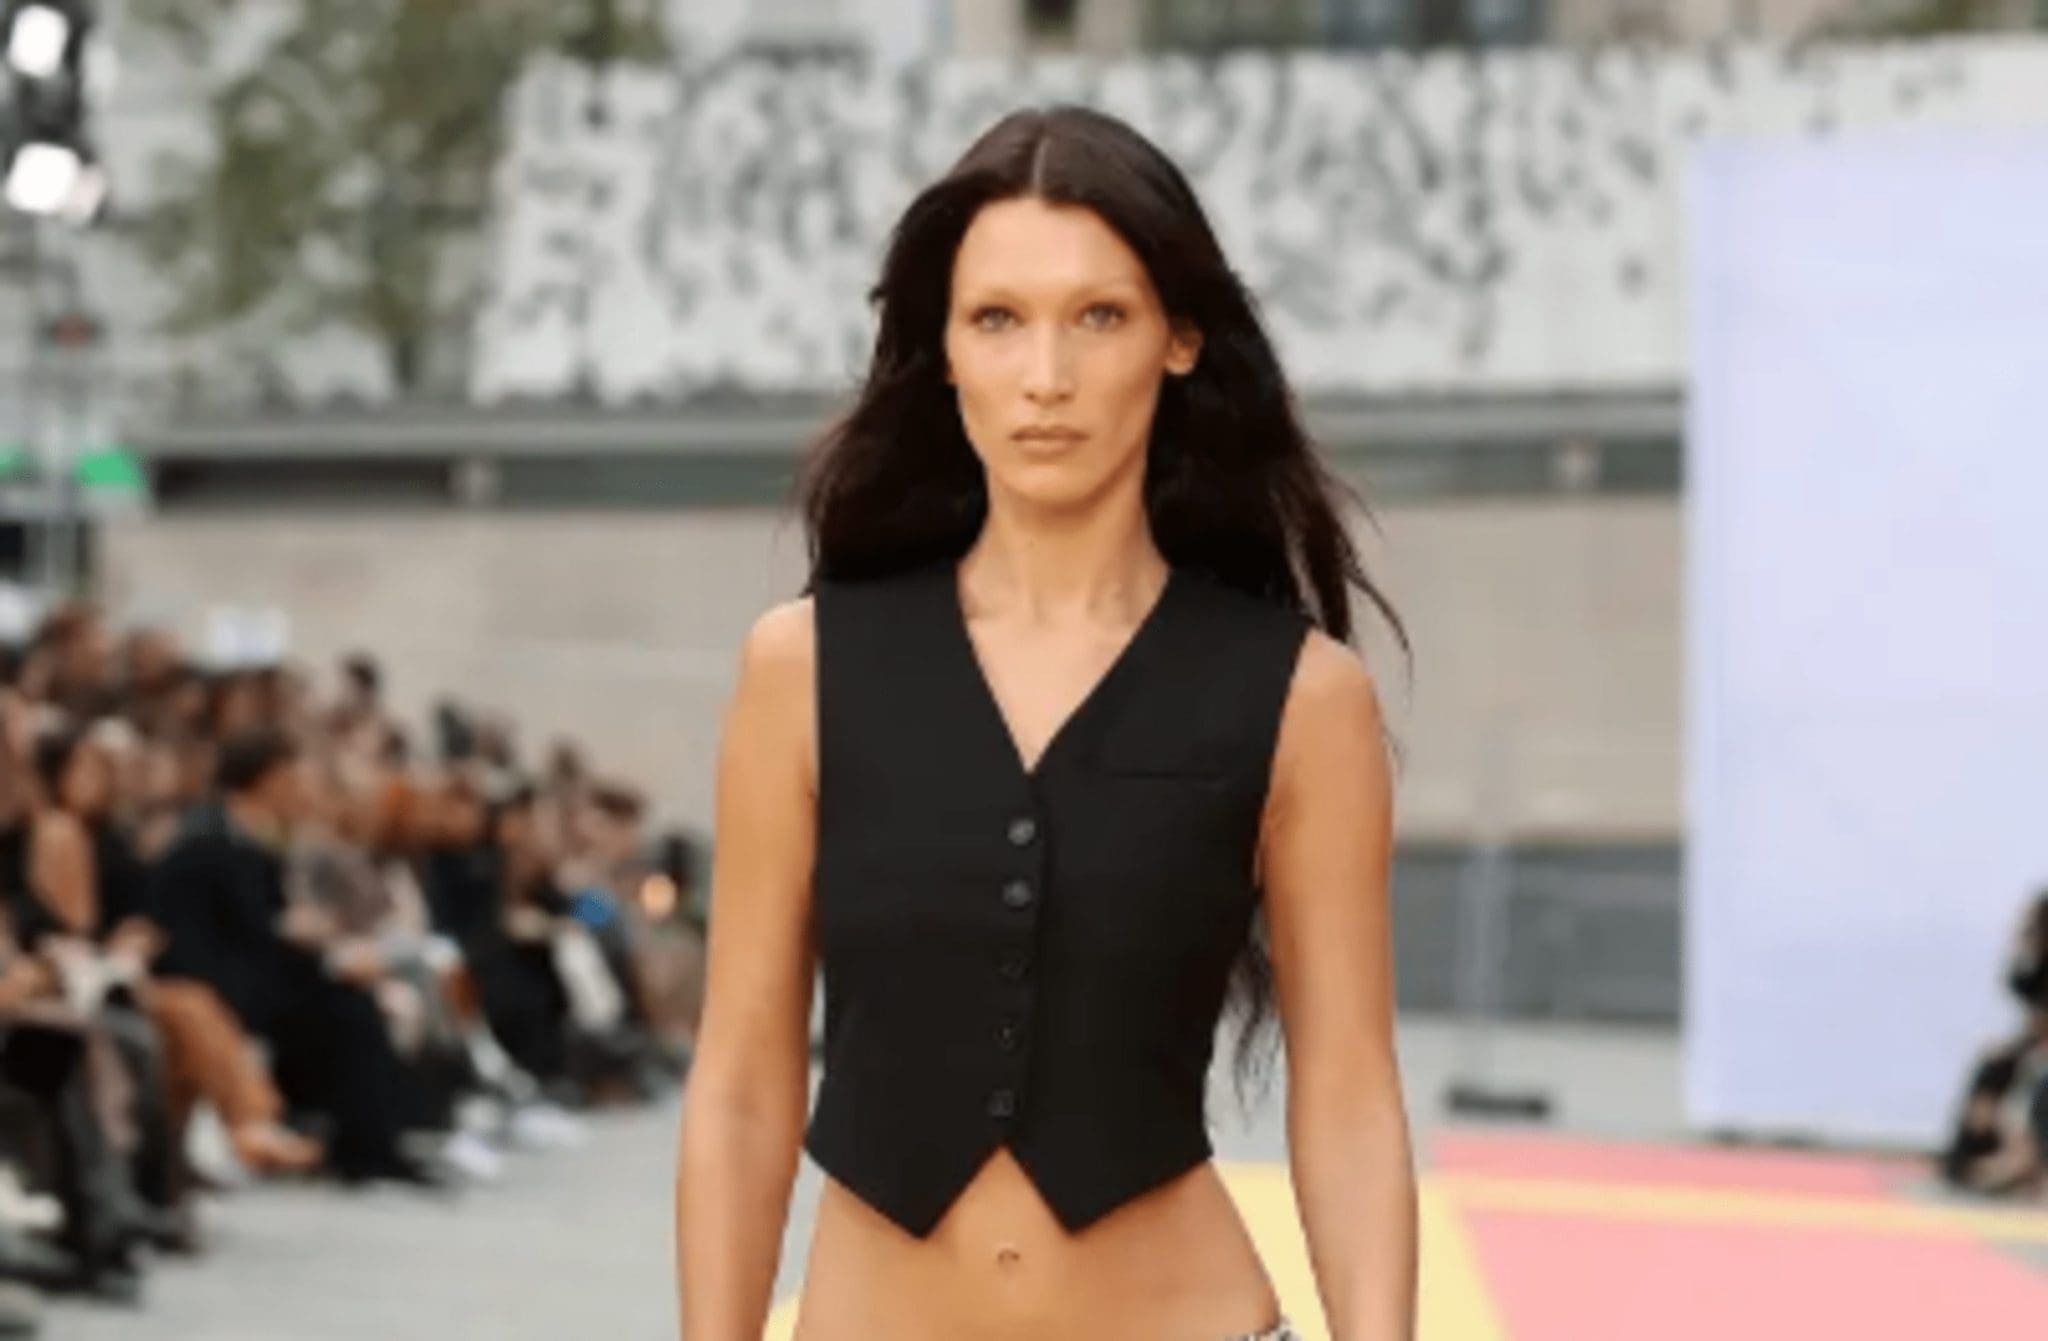 Bella walked the Stella McCartney runway without a bra, showing off a skintight, embroidered catsuit.